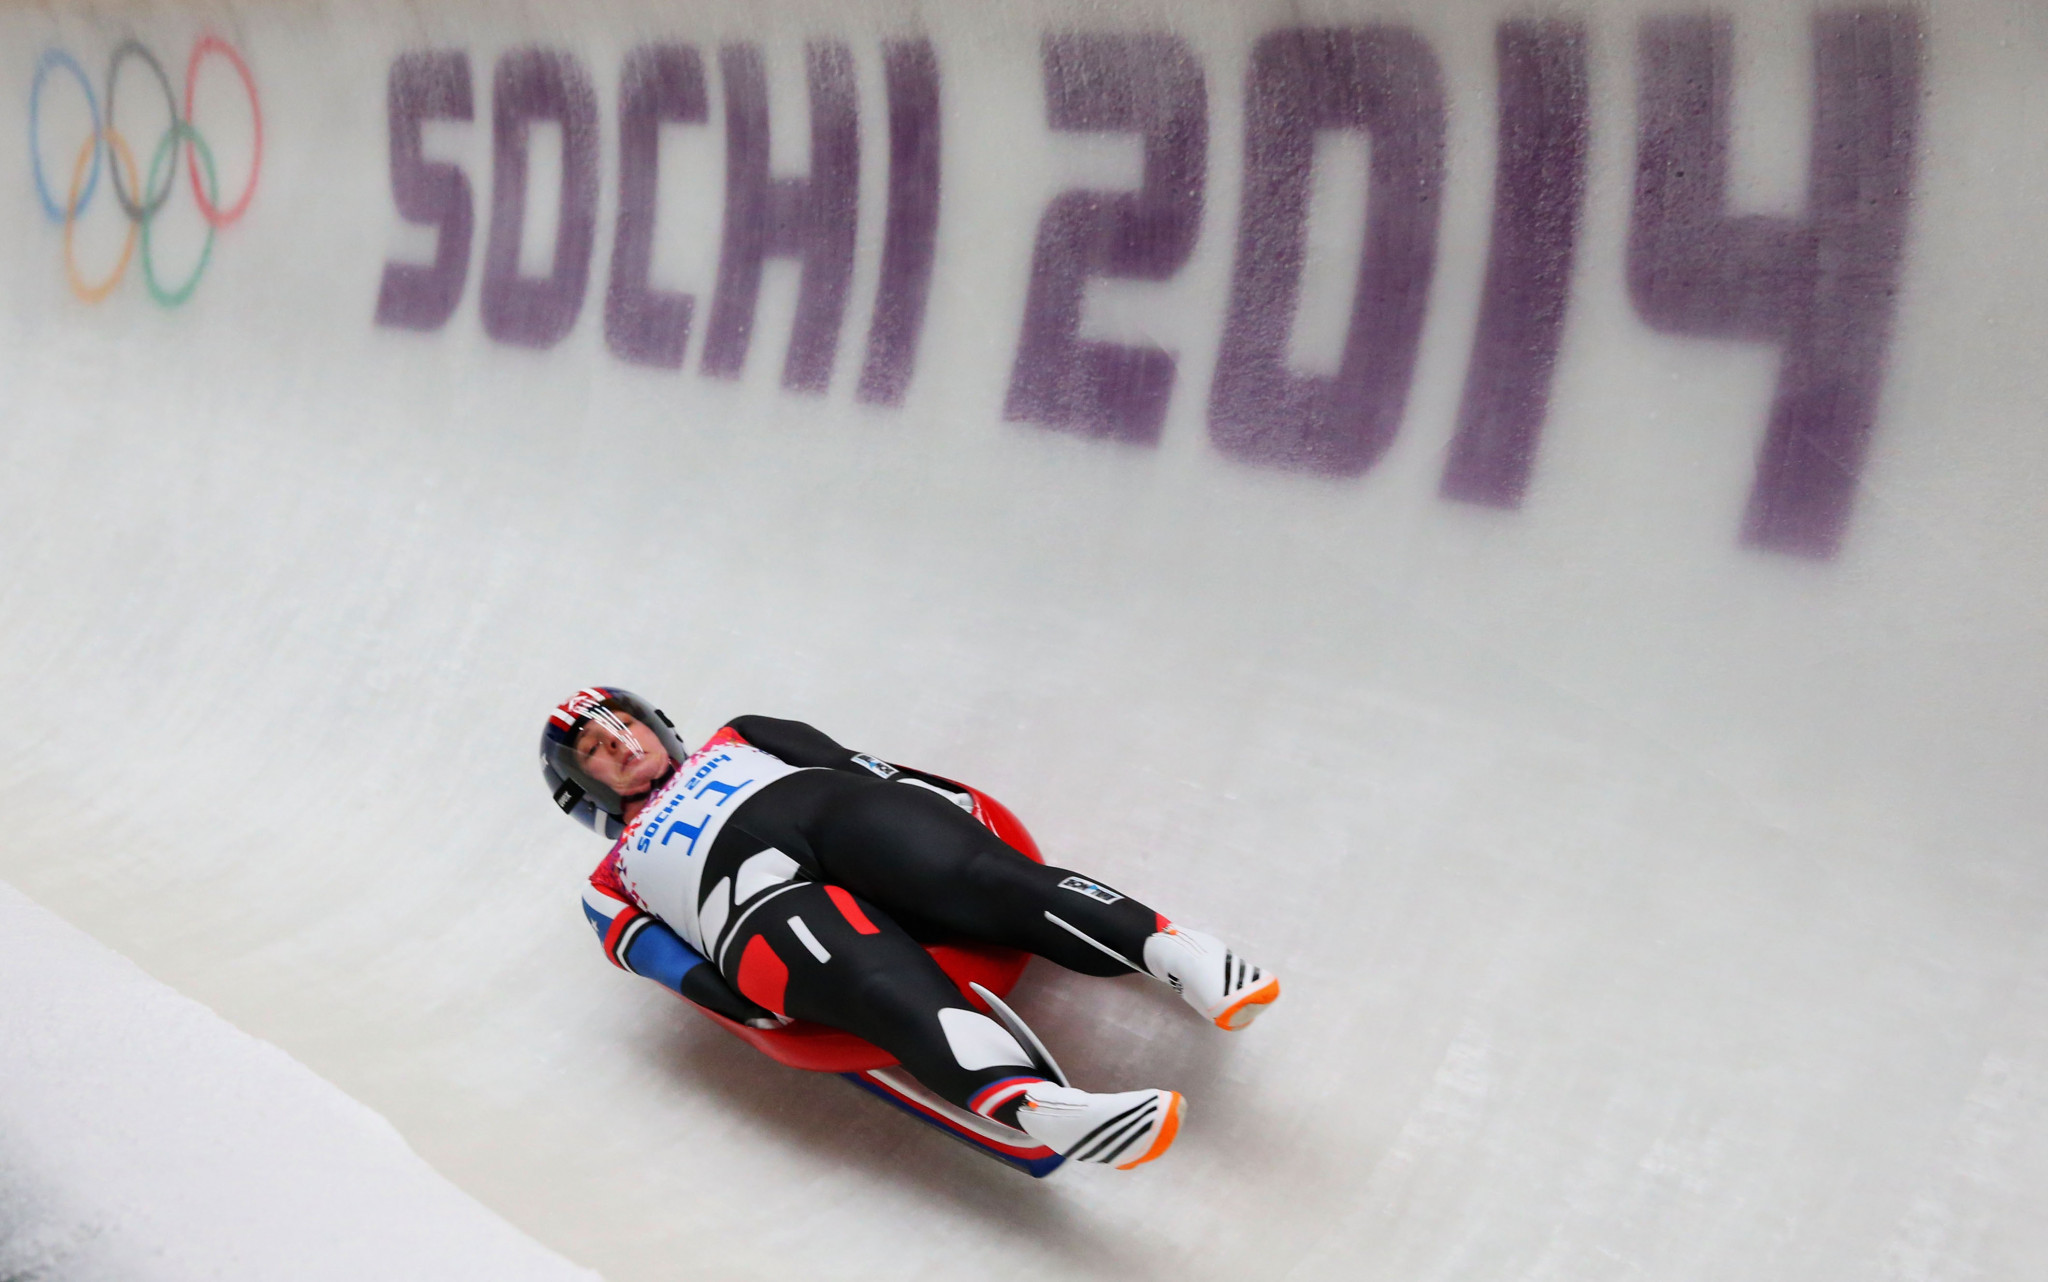 The United States are hoping to win their first gold medal in luge at the 2026 Winter Olympics ©Getty Images